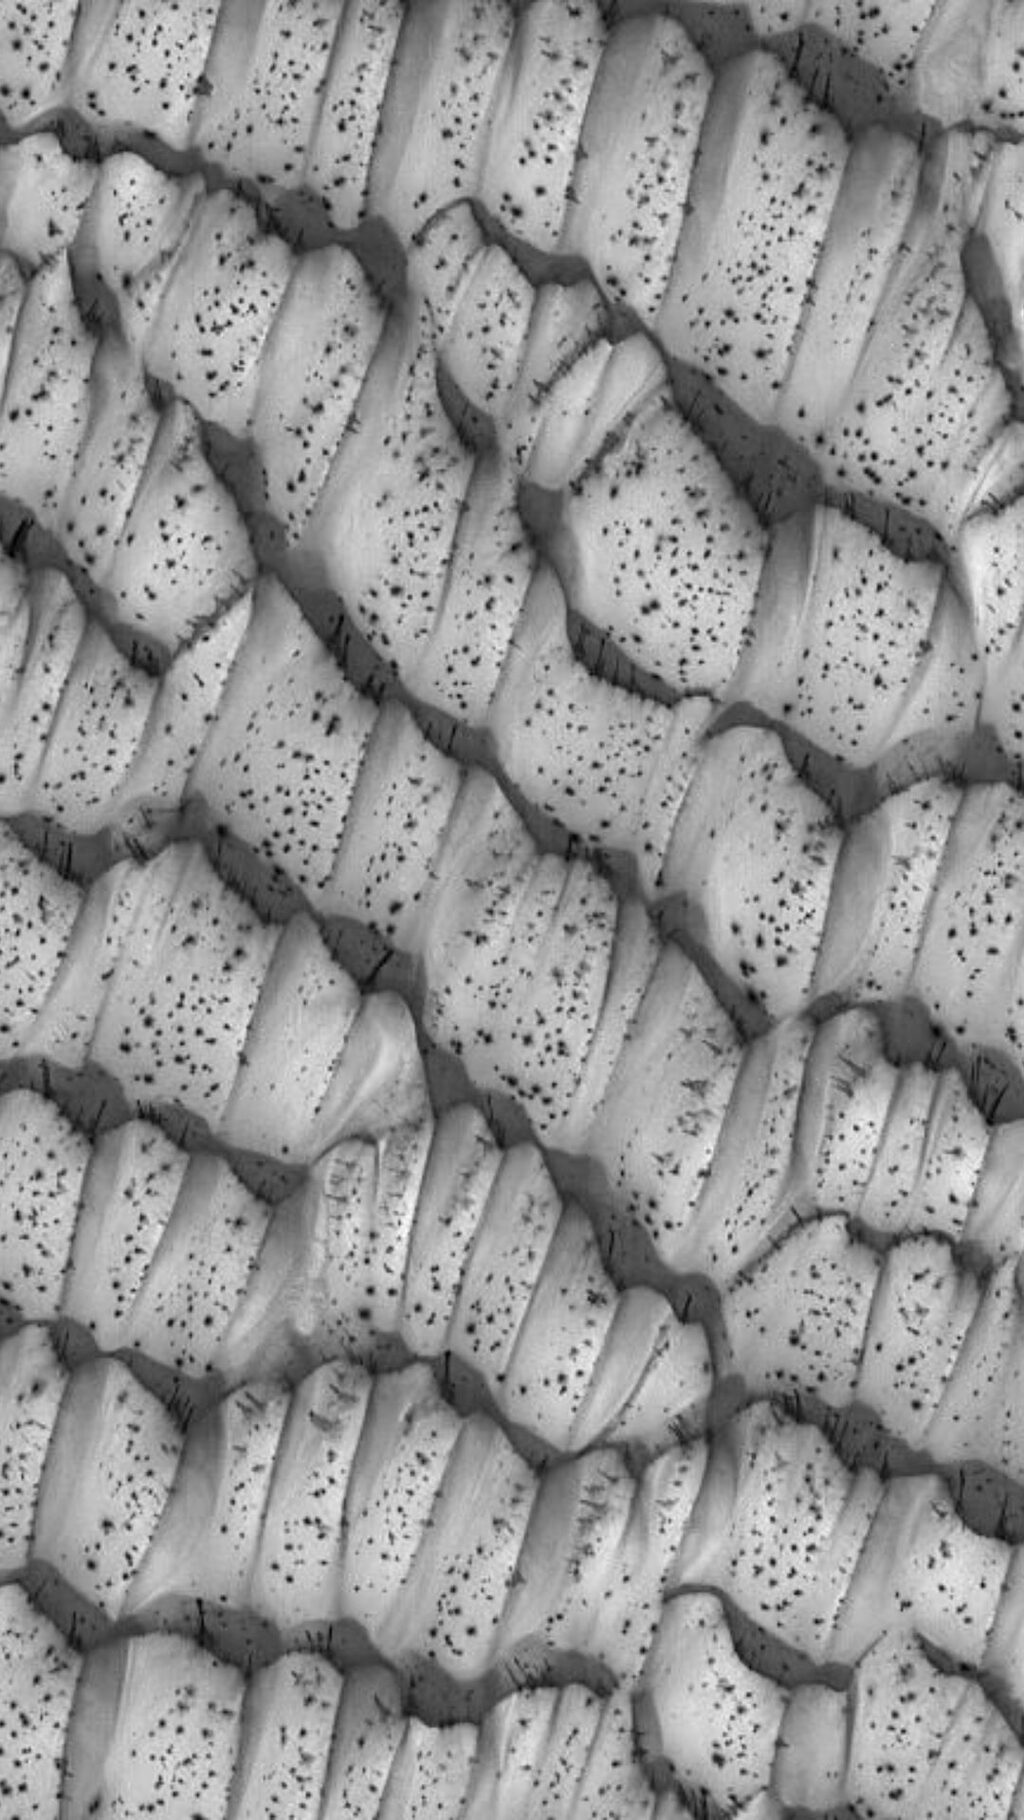 black and white image of the dots on the dunes of Mars, dots resembling ants.